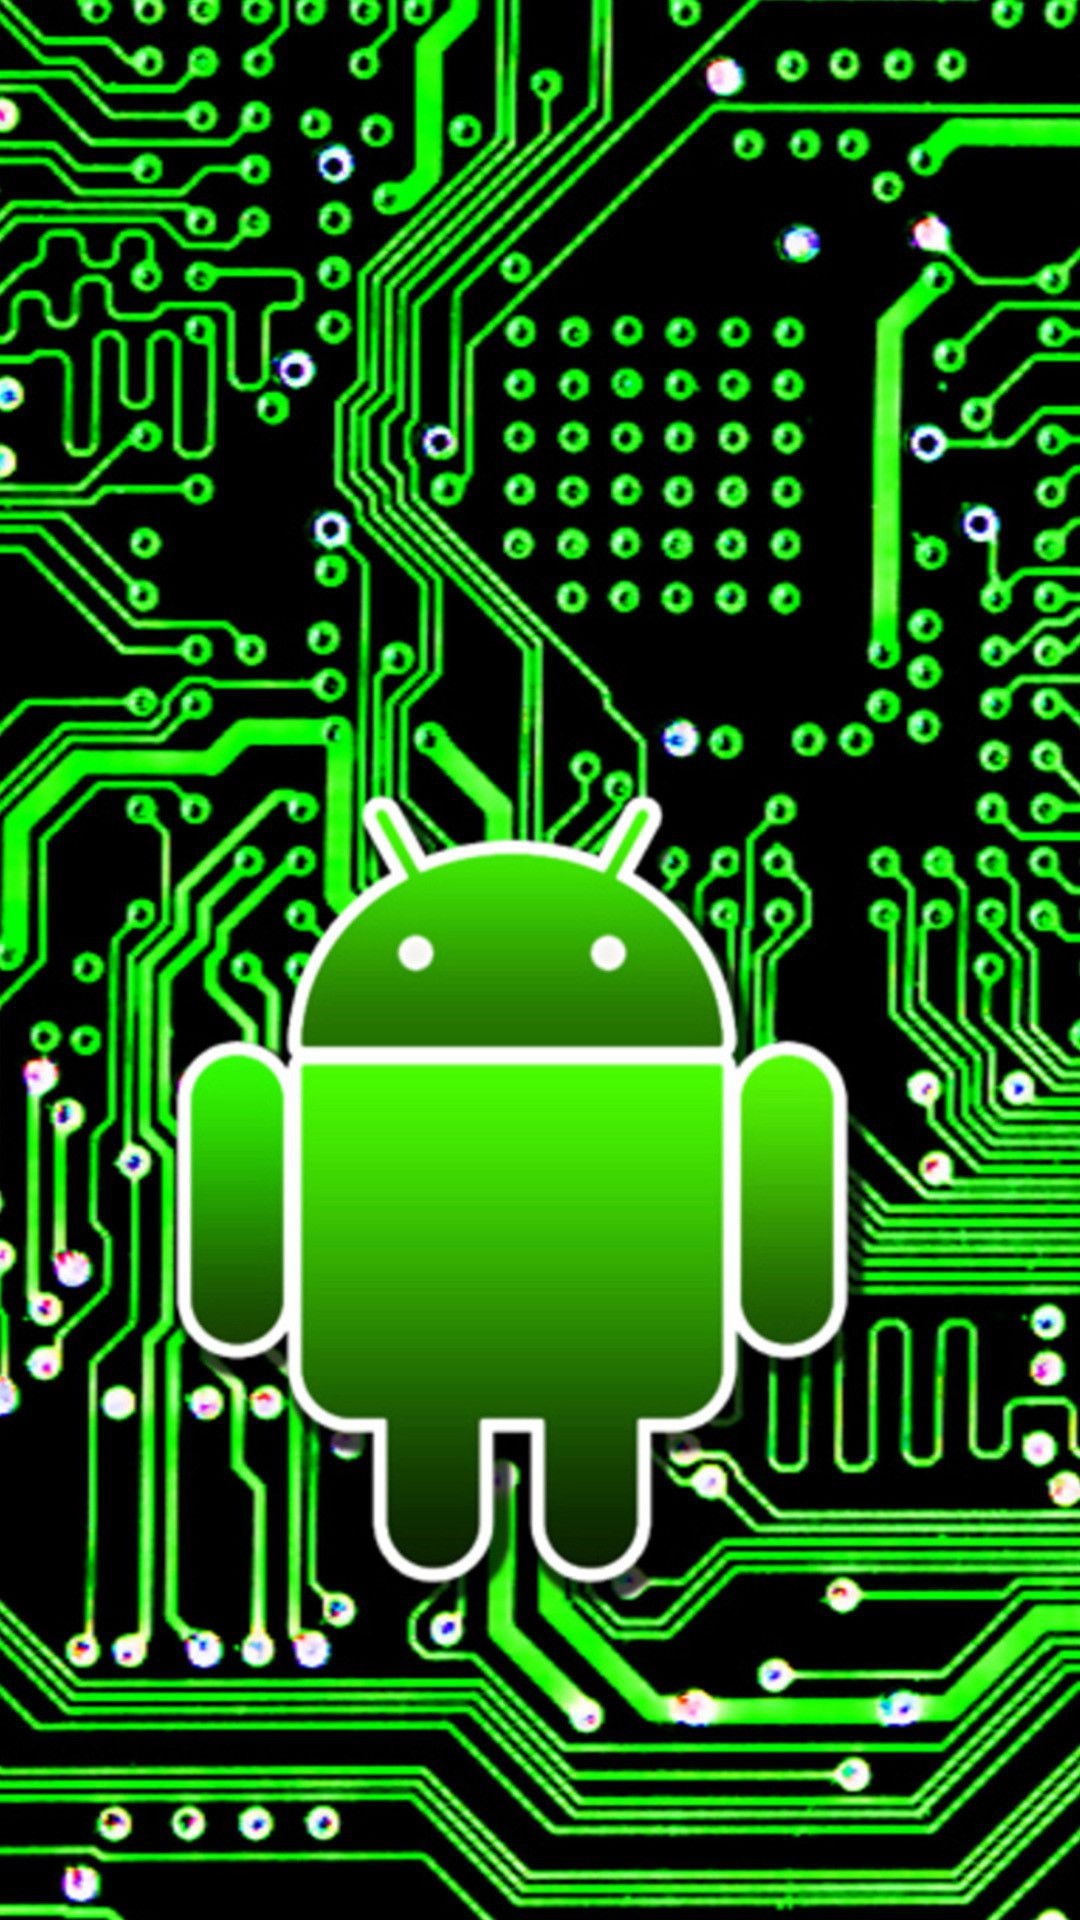 Android Circuit Board 01 Galaxy S5 .wallpapertip.com